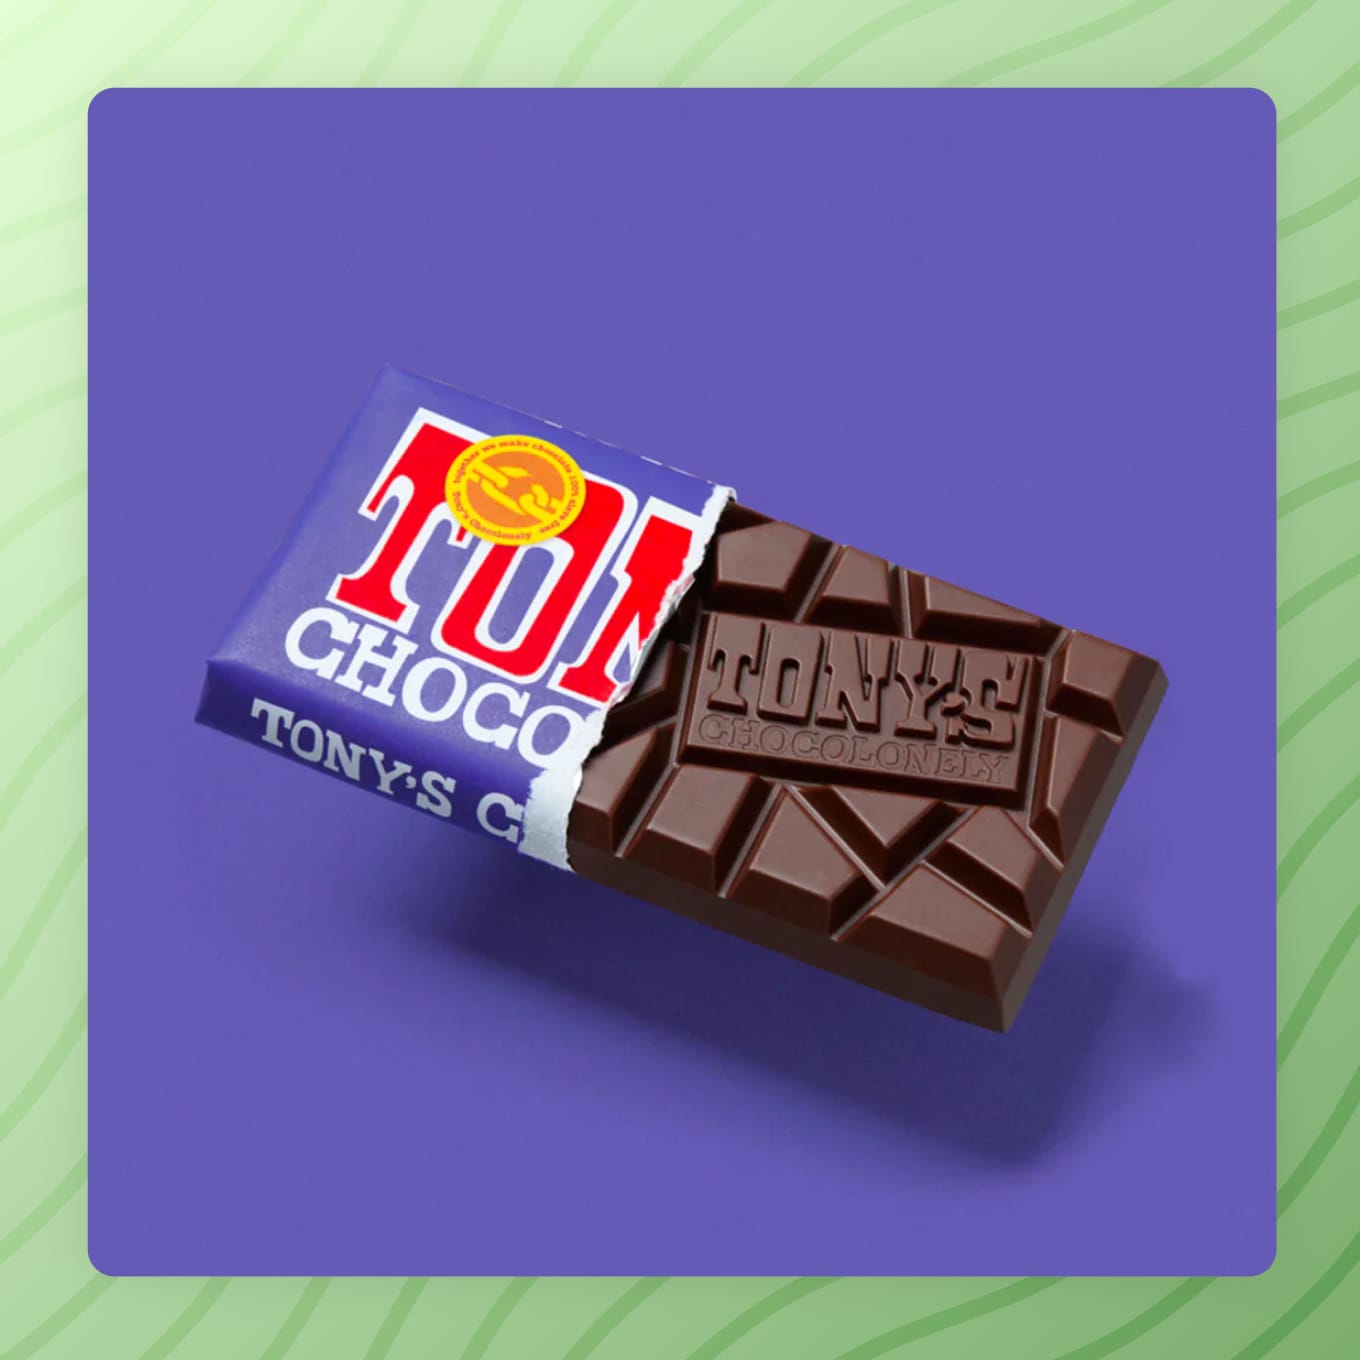 Chocolate bar from Tony's Chocolonely